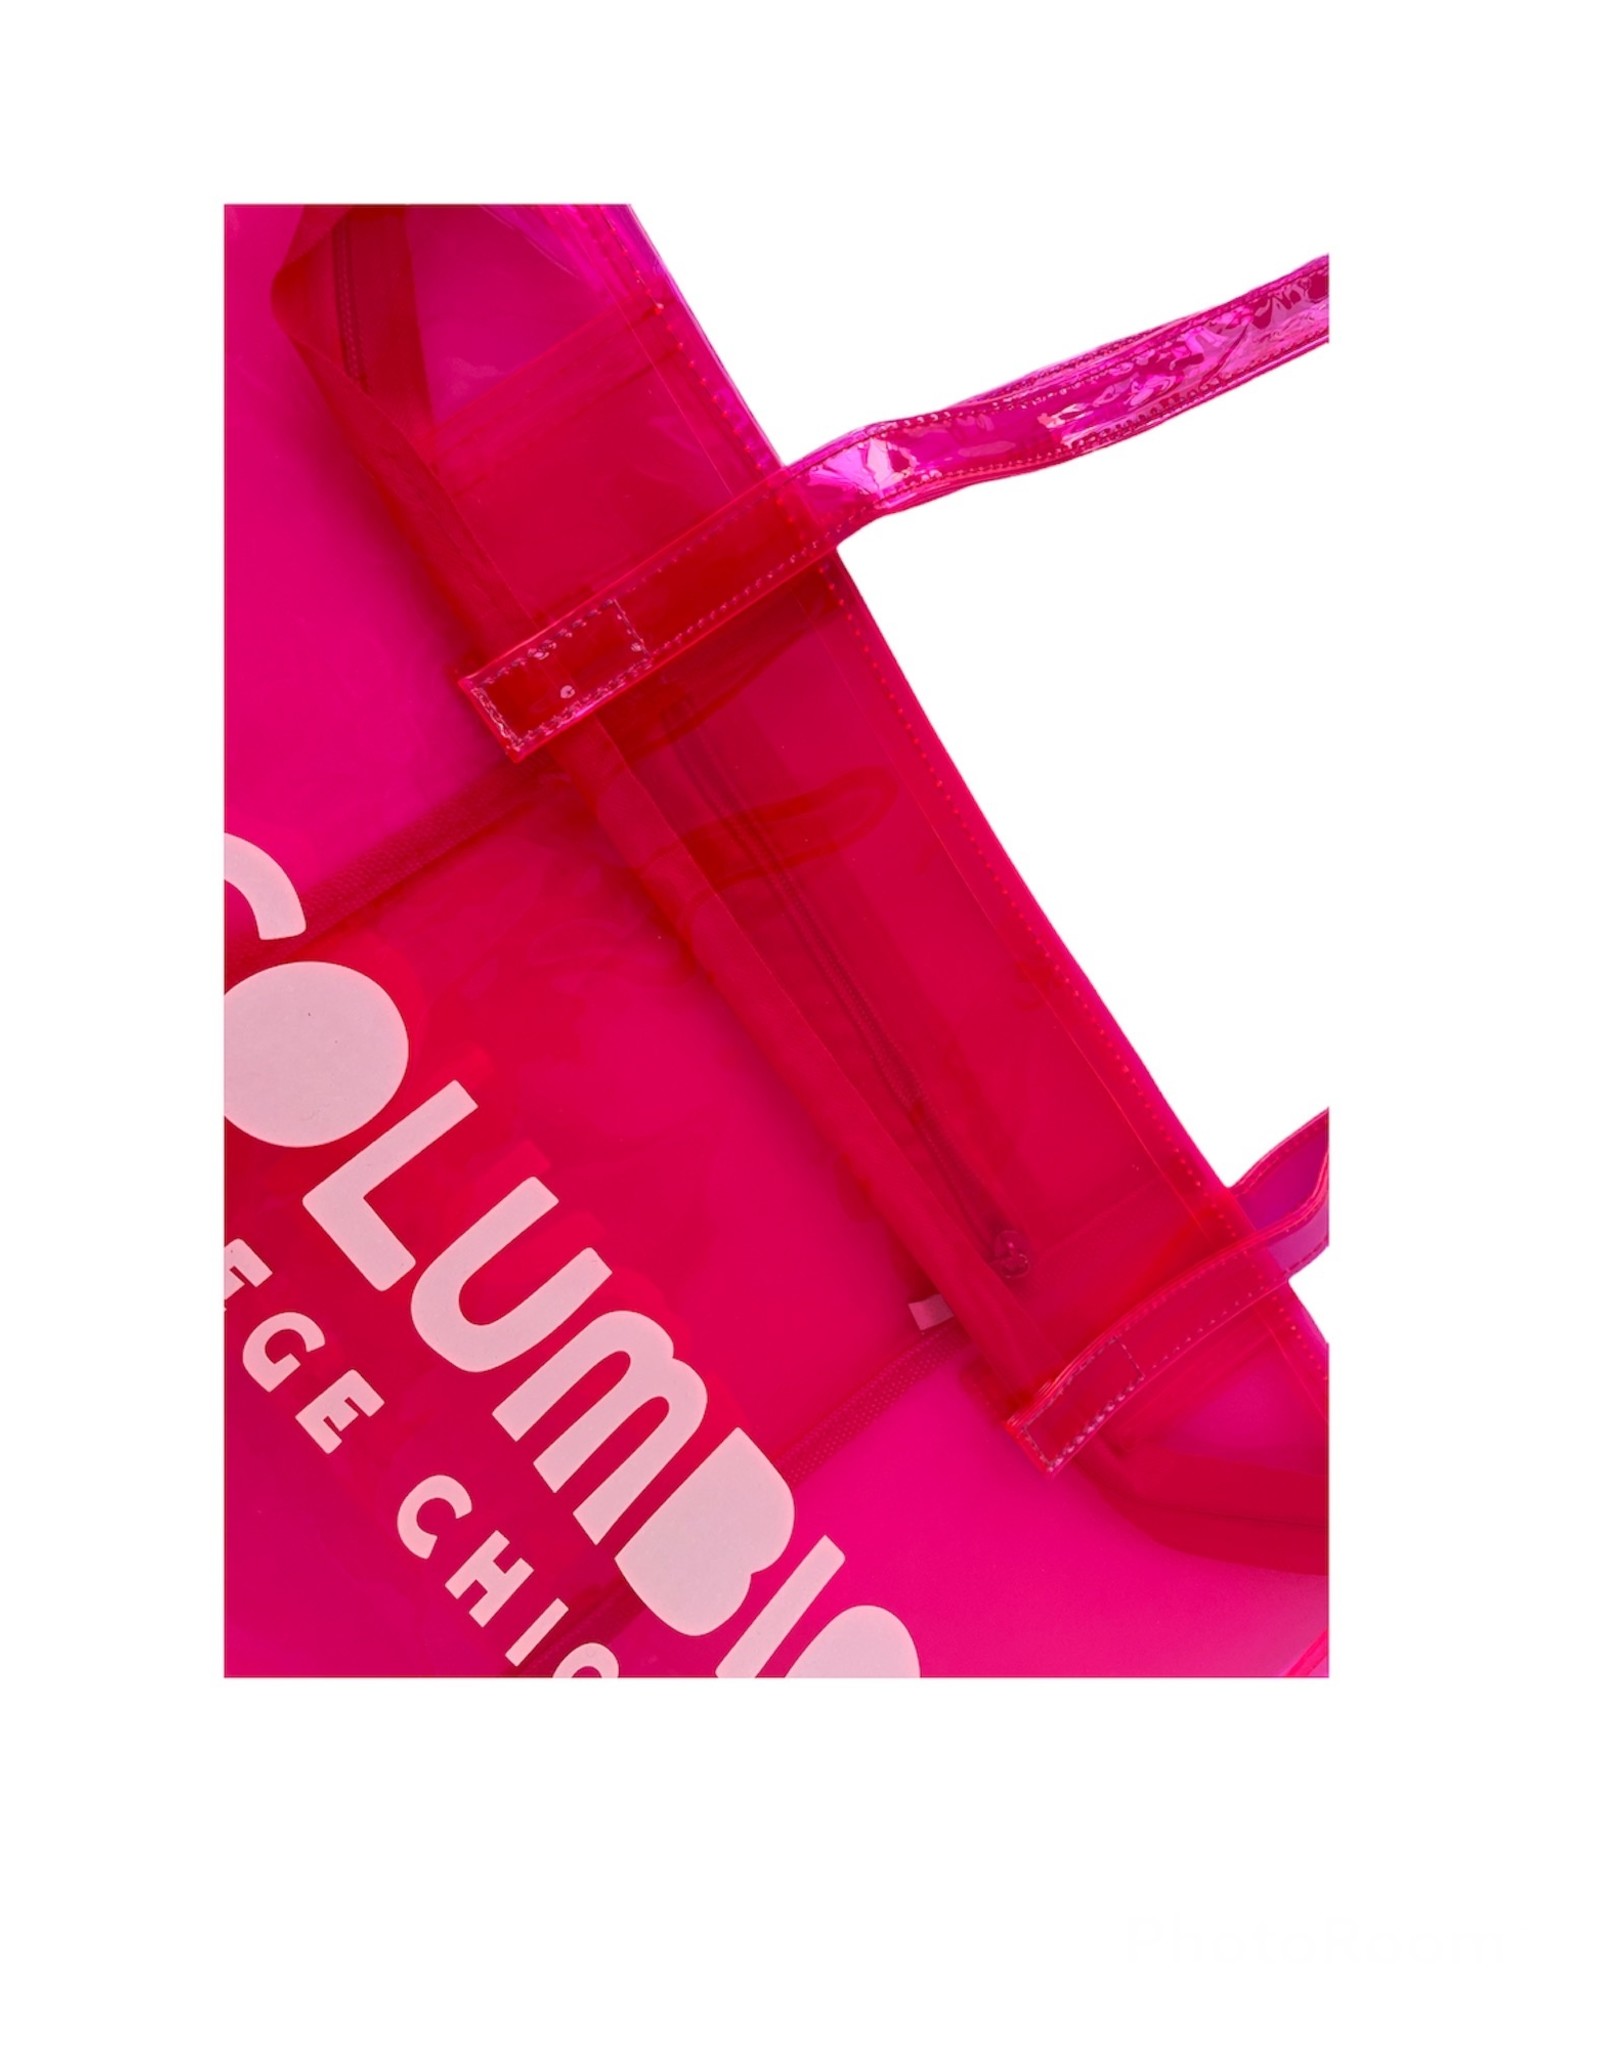 Buy Columbia, By Columbia Columbia College Chicago Neon Pink Jelly Tote - Buy Columbia, By Columbia